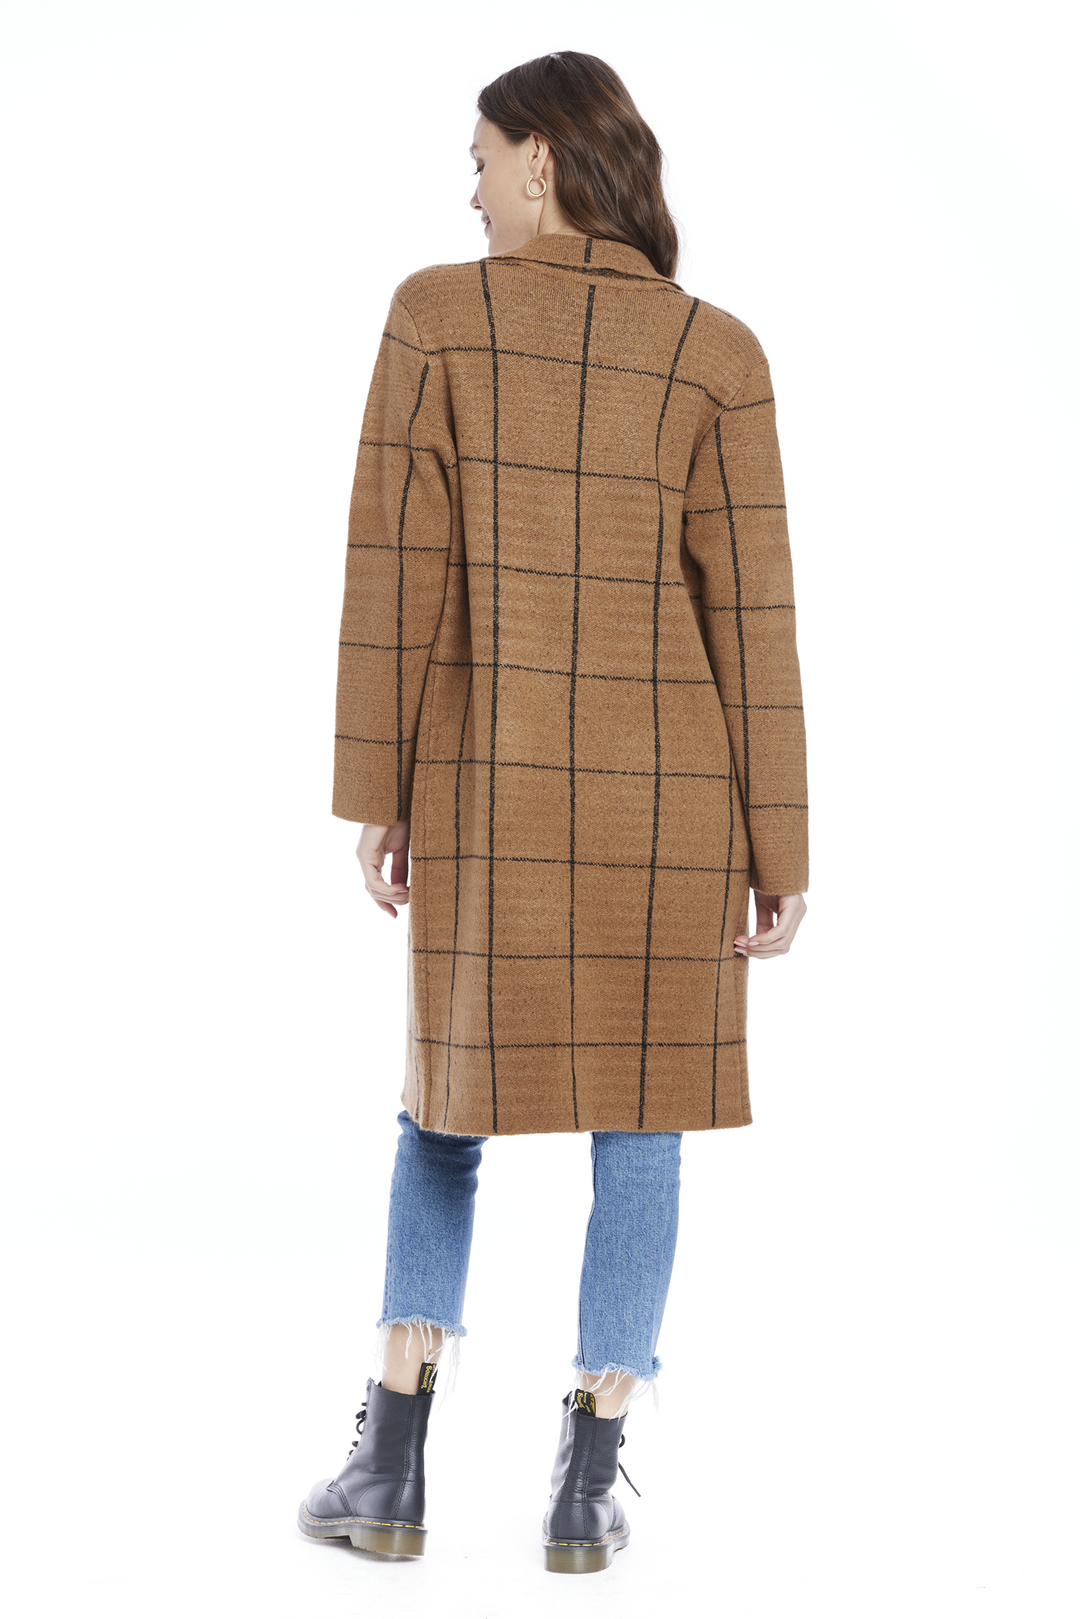 Plaid Long Sweater Jacket | Sienna - Main Image Number 3 of 3